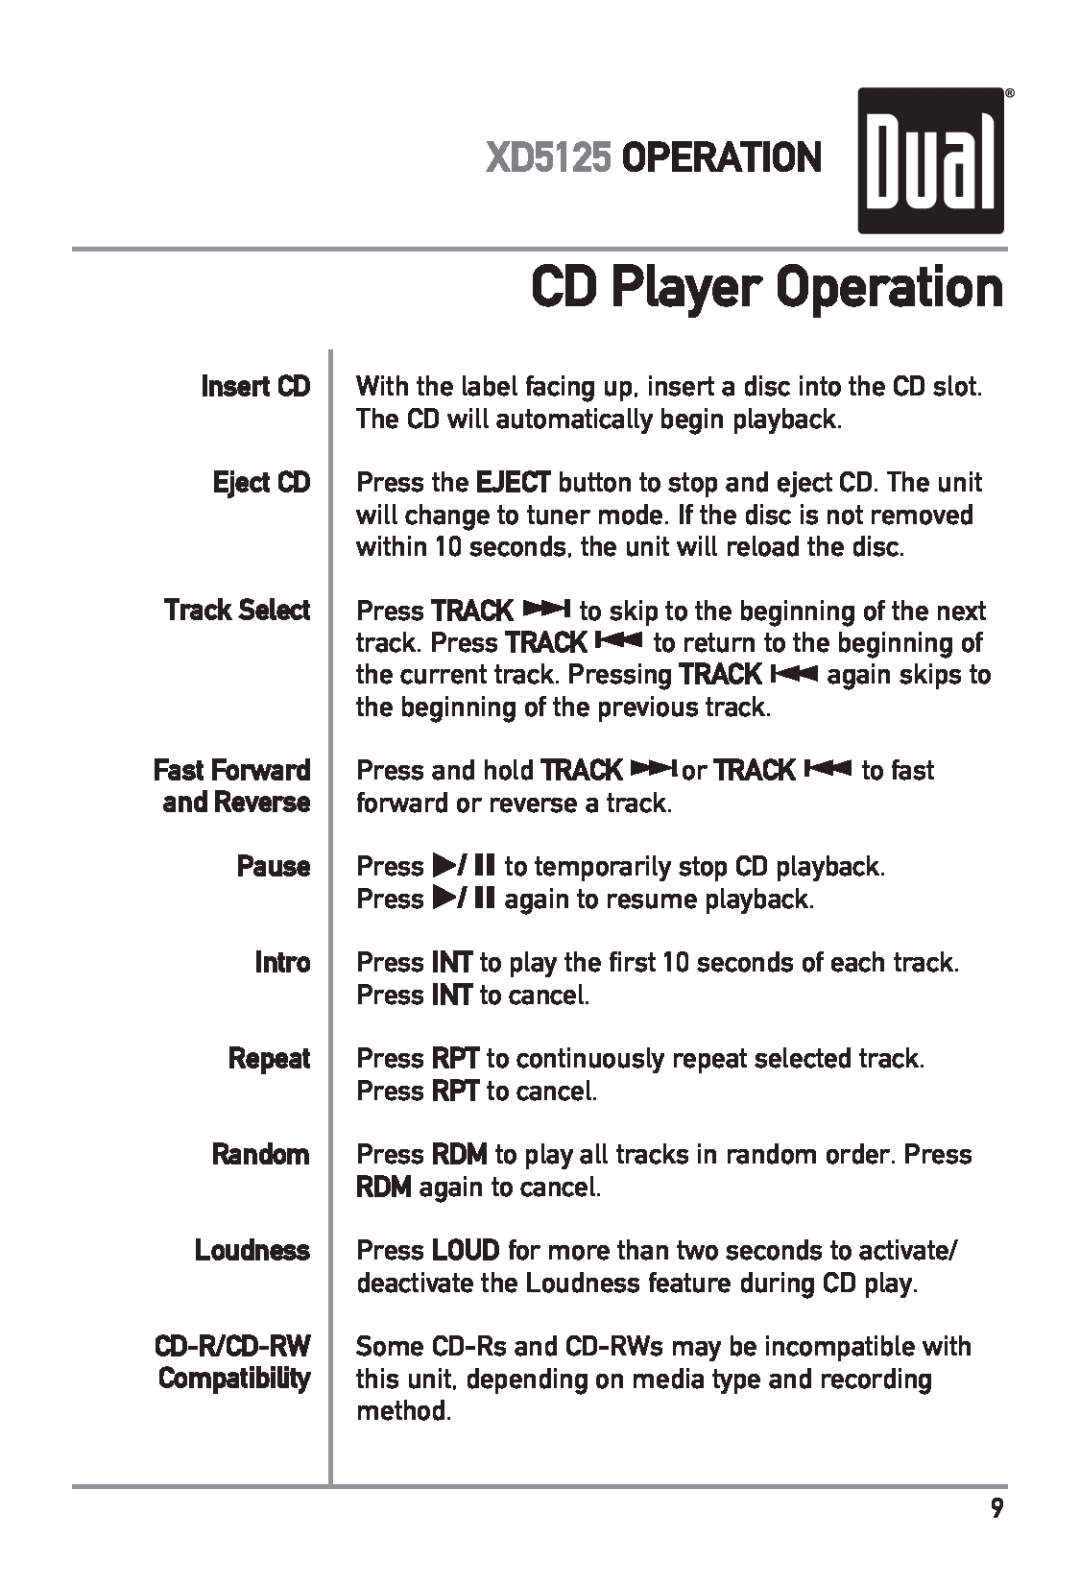 Dual CD Player Operation, XD5125 OPERATION, Insert CD Eject CD Track Select, Pause Intro Repeat Random Loudness 